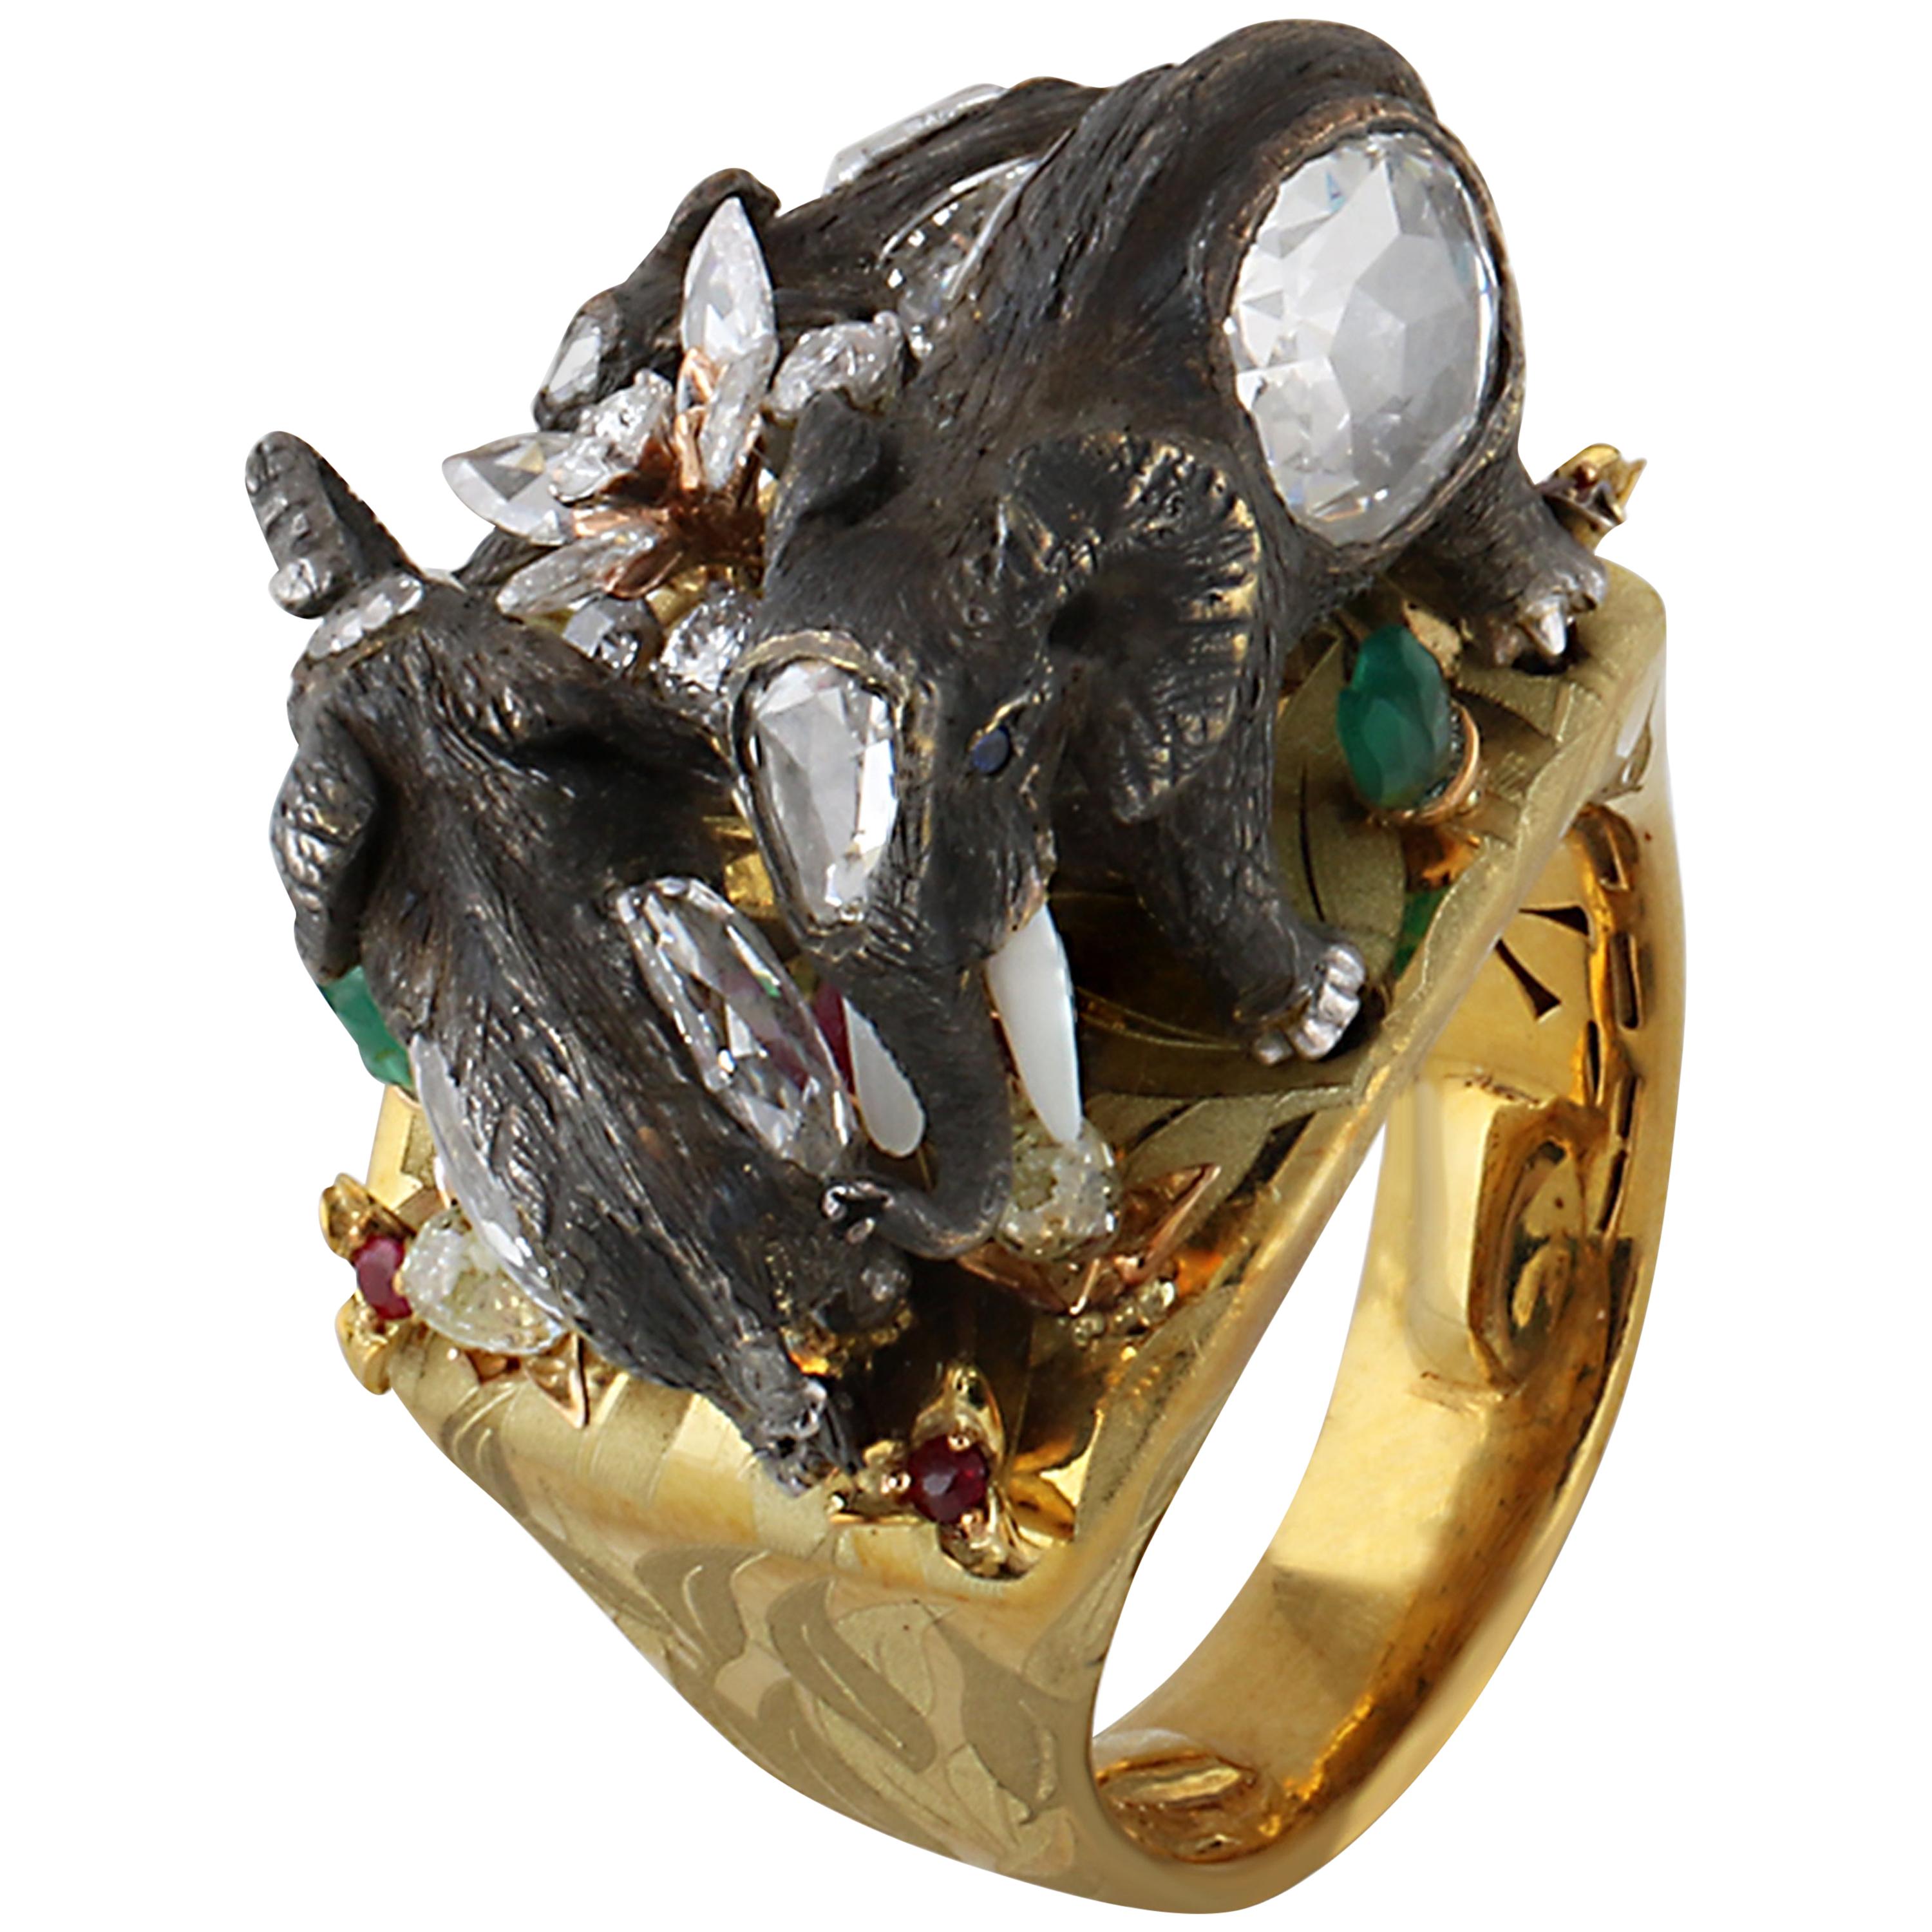 Studio Rêves Handcrafted Giant Elephant Cocktail Ring in 18 Karat Gold